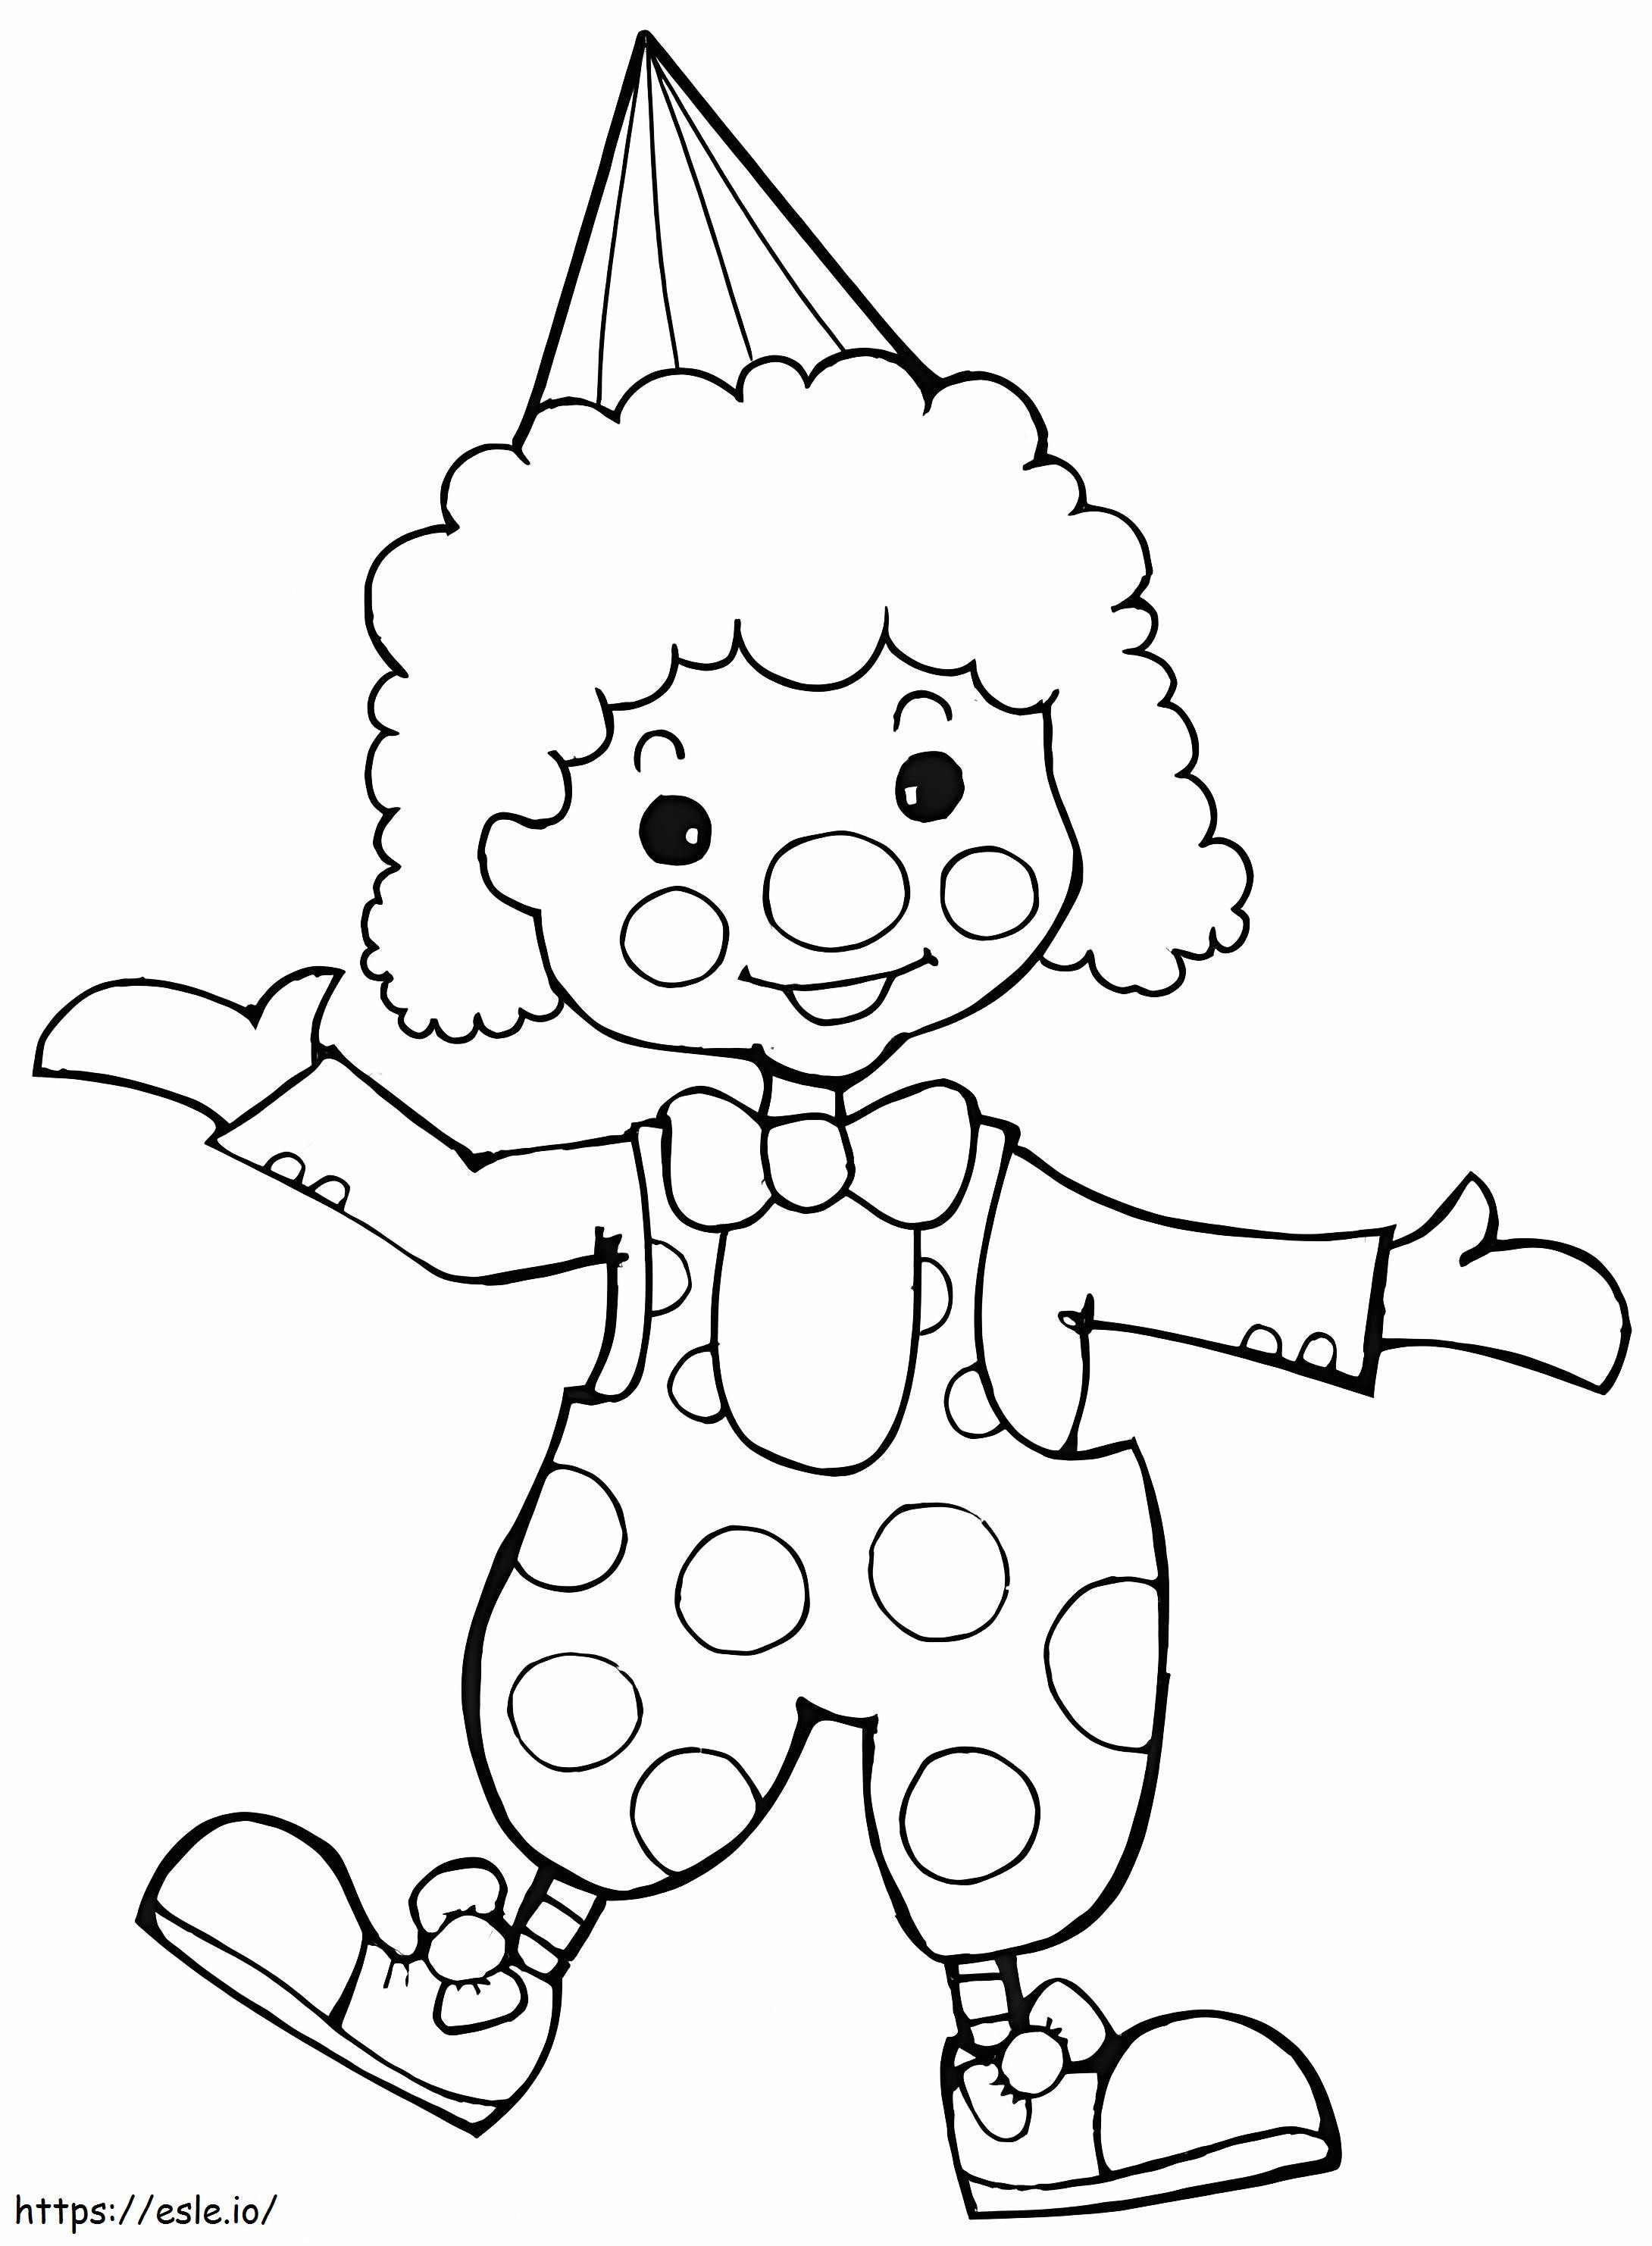 Kids Clown coloring page